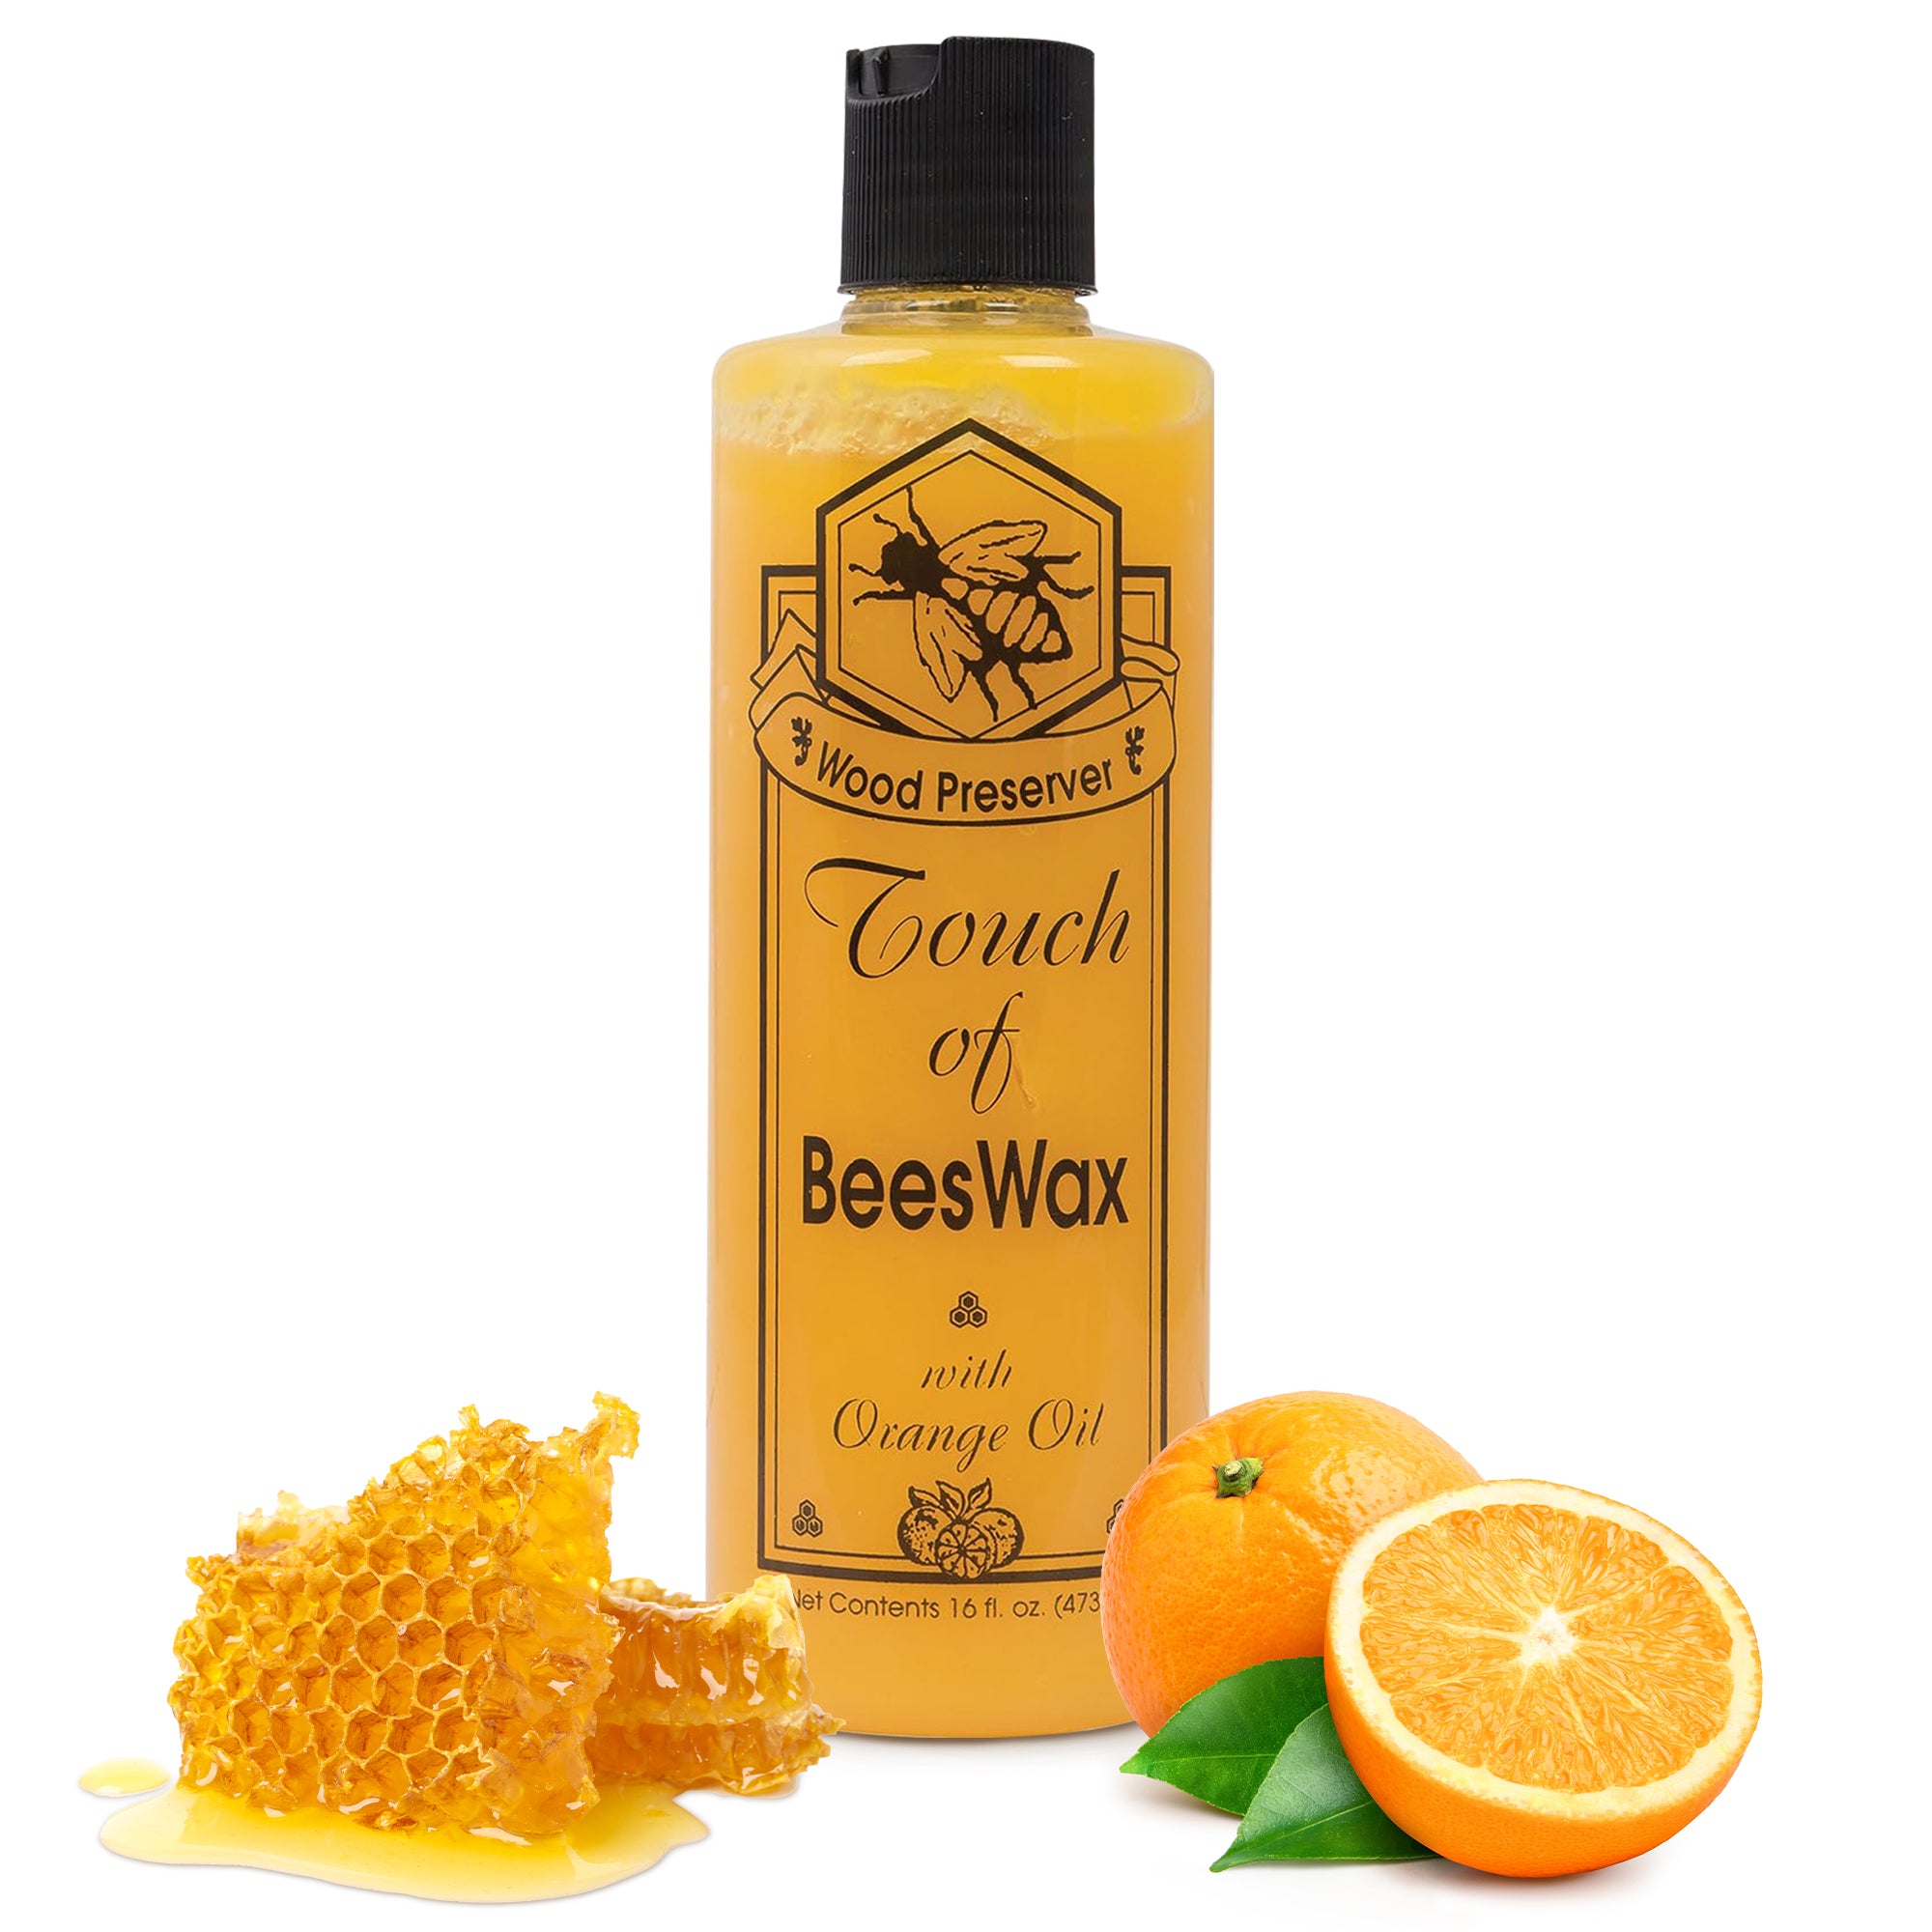 Wood Polish - Beeswax and Mineral Oil - All Natural - The Foundry Home Goods